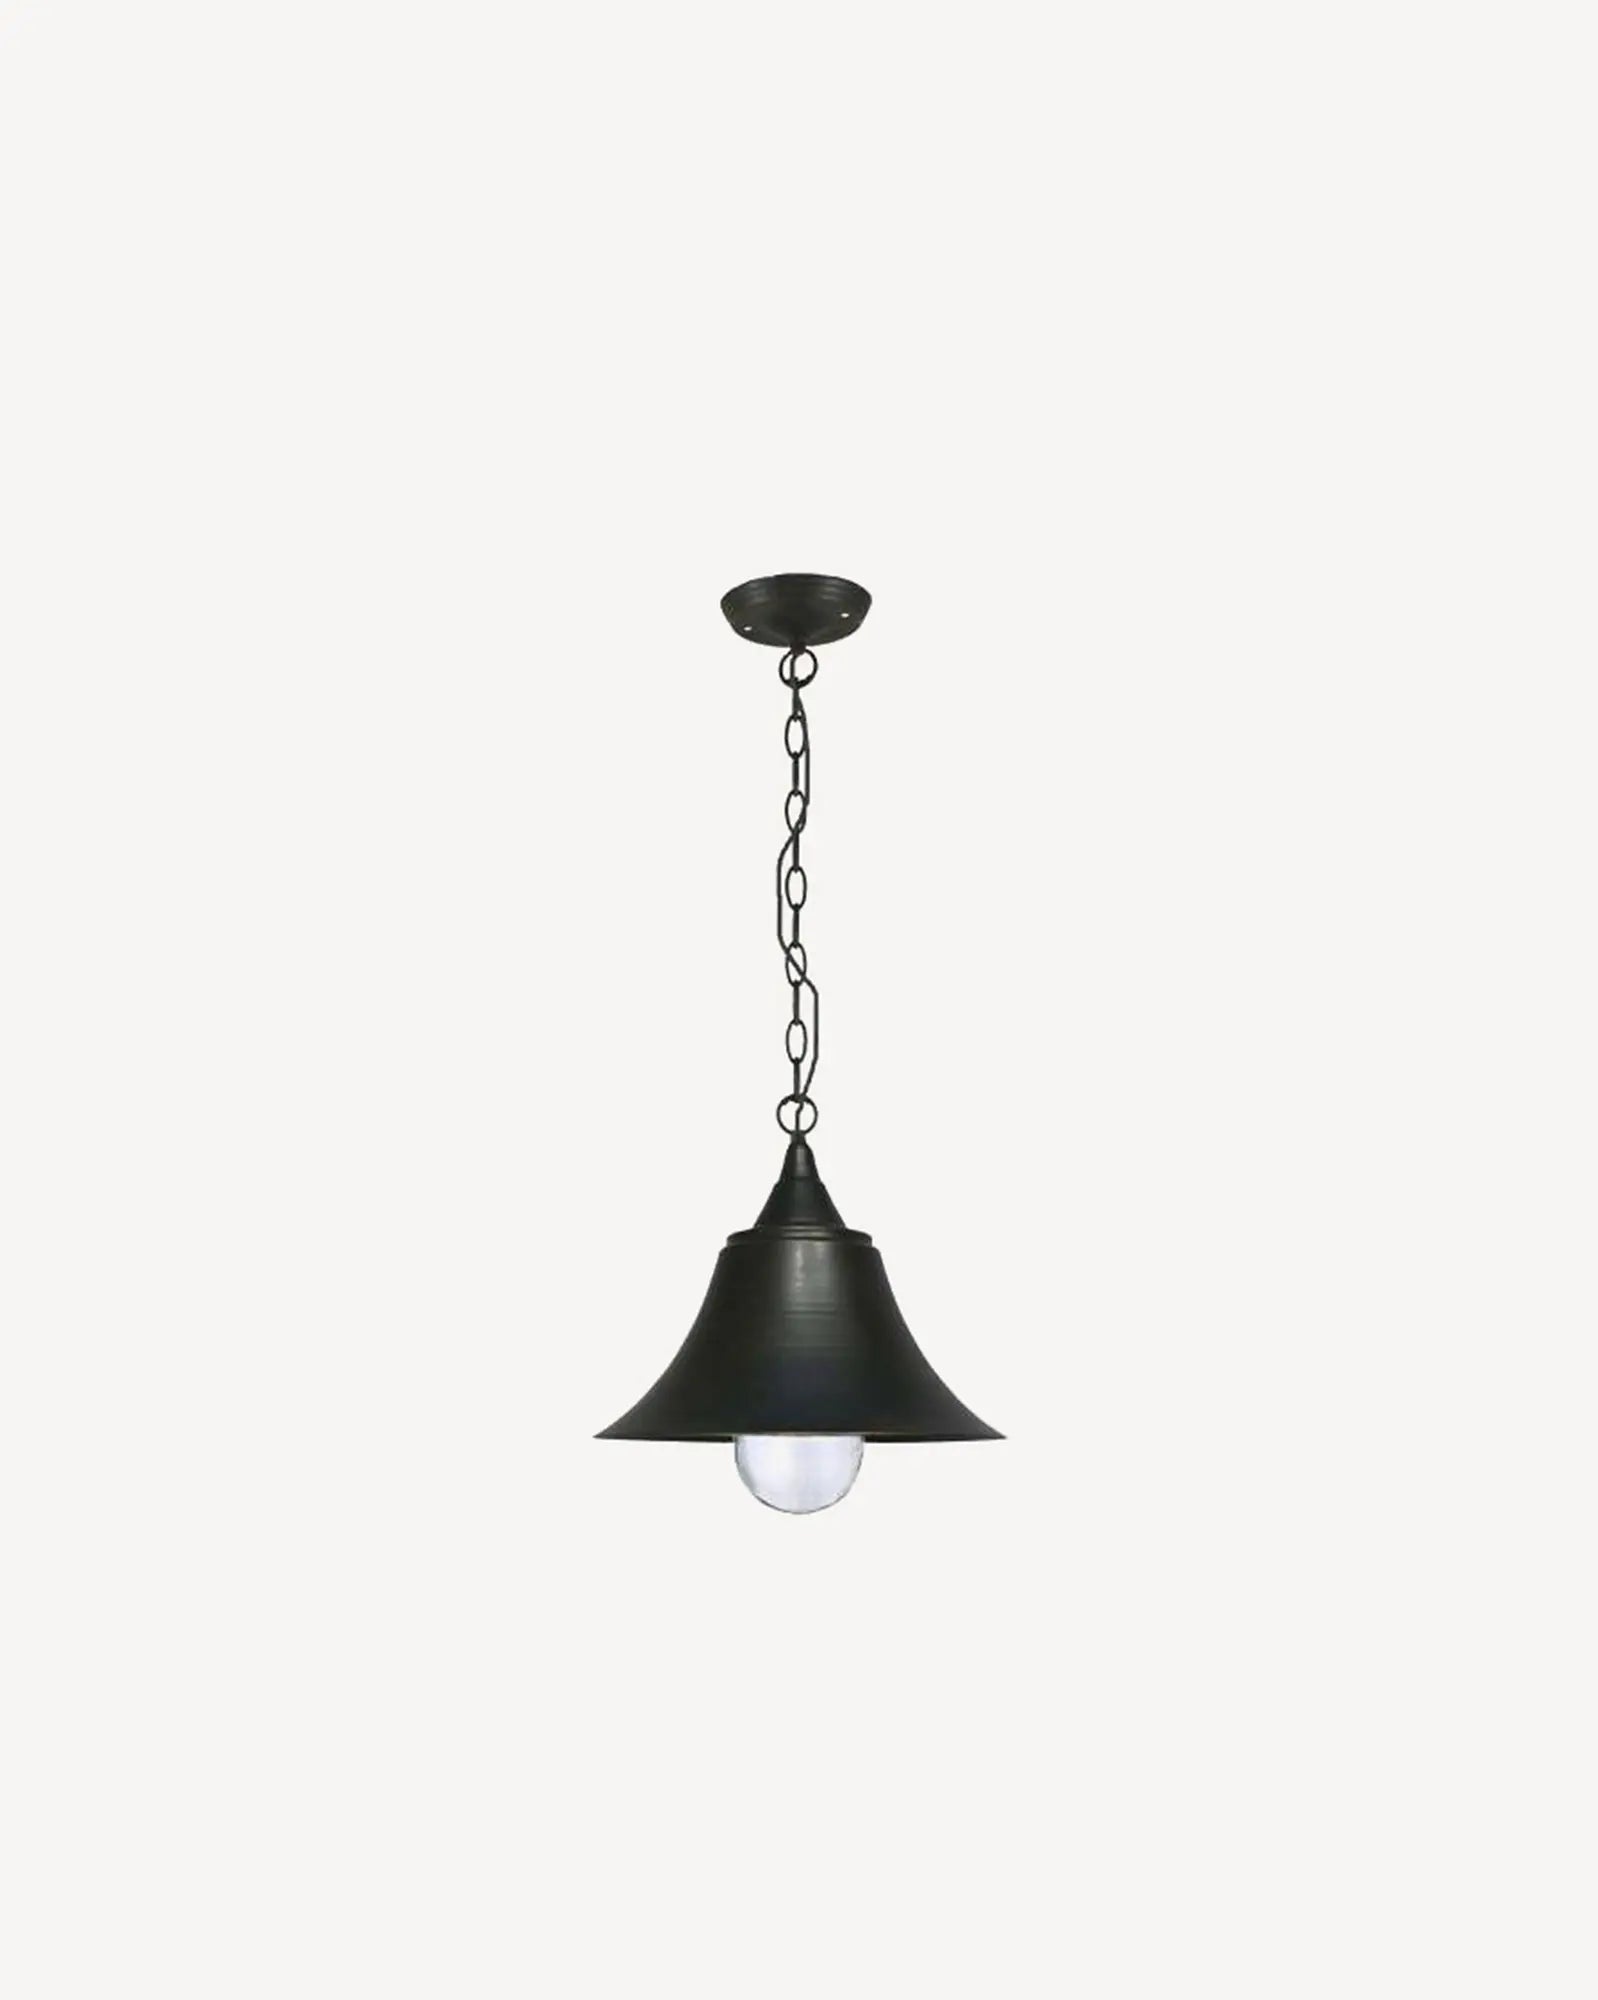 Causeway Chain Pendant by Inspiration Light at Nook Collections